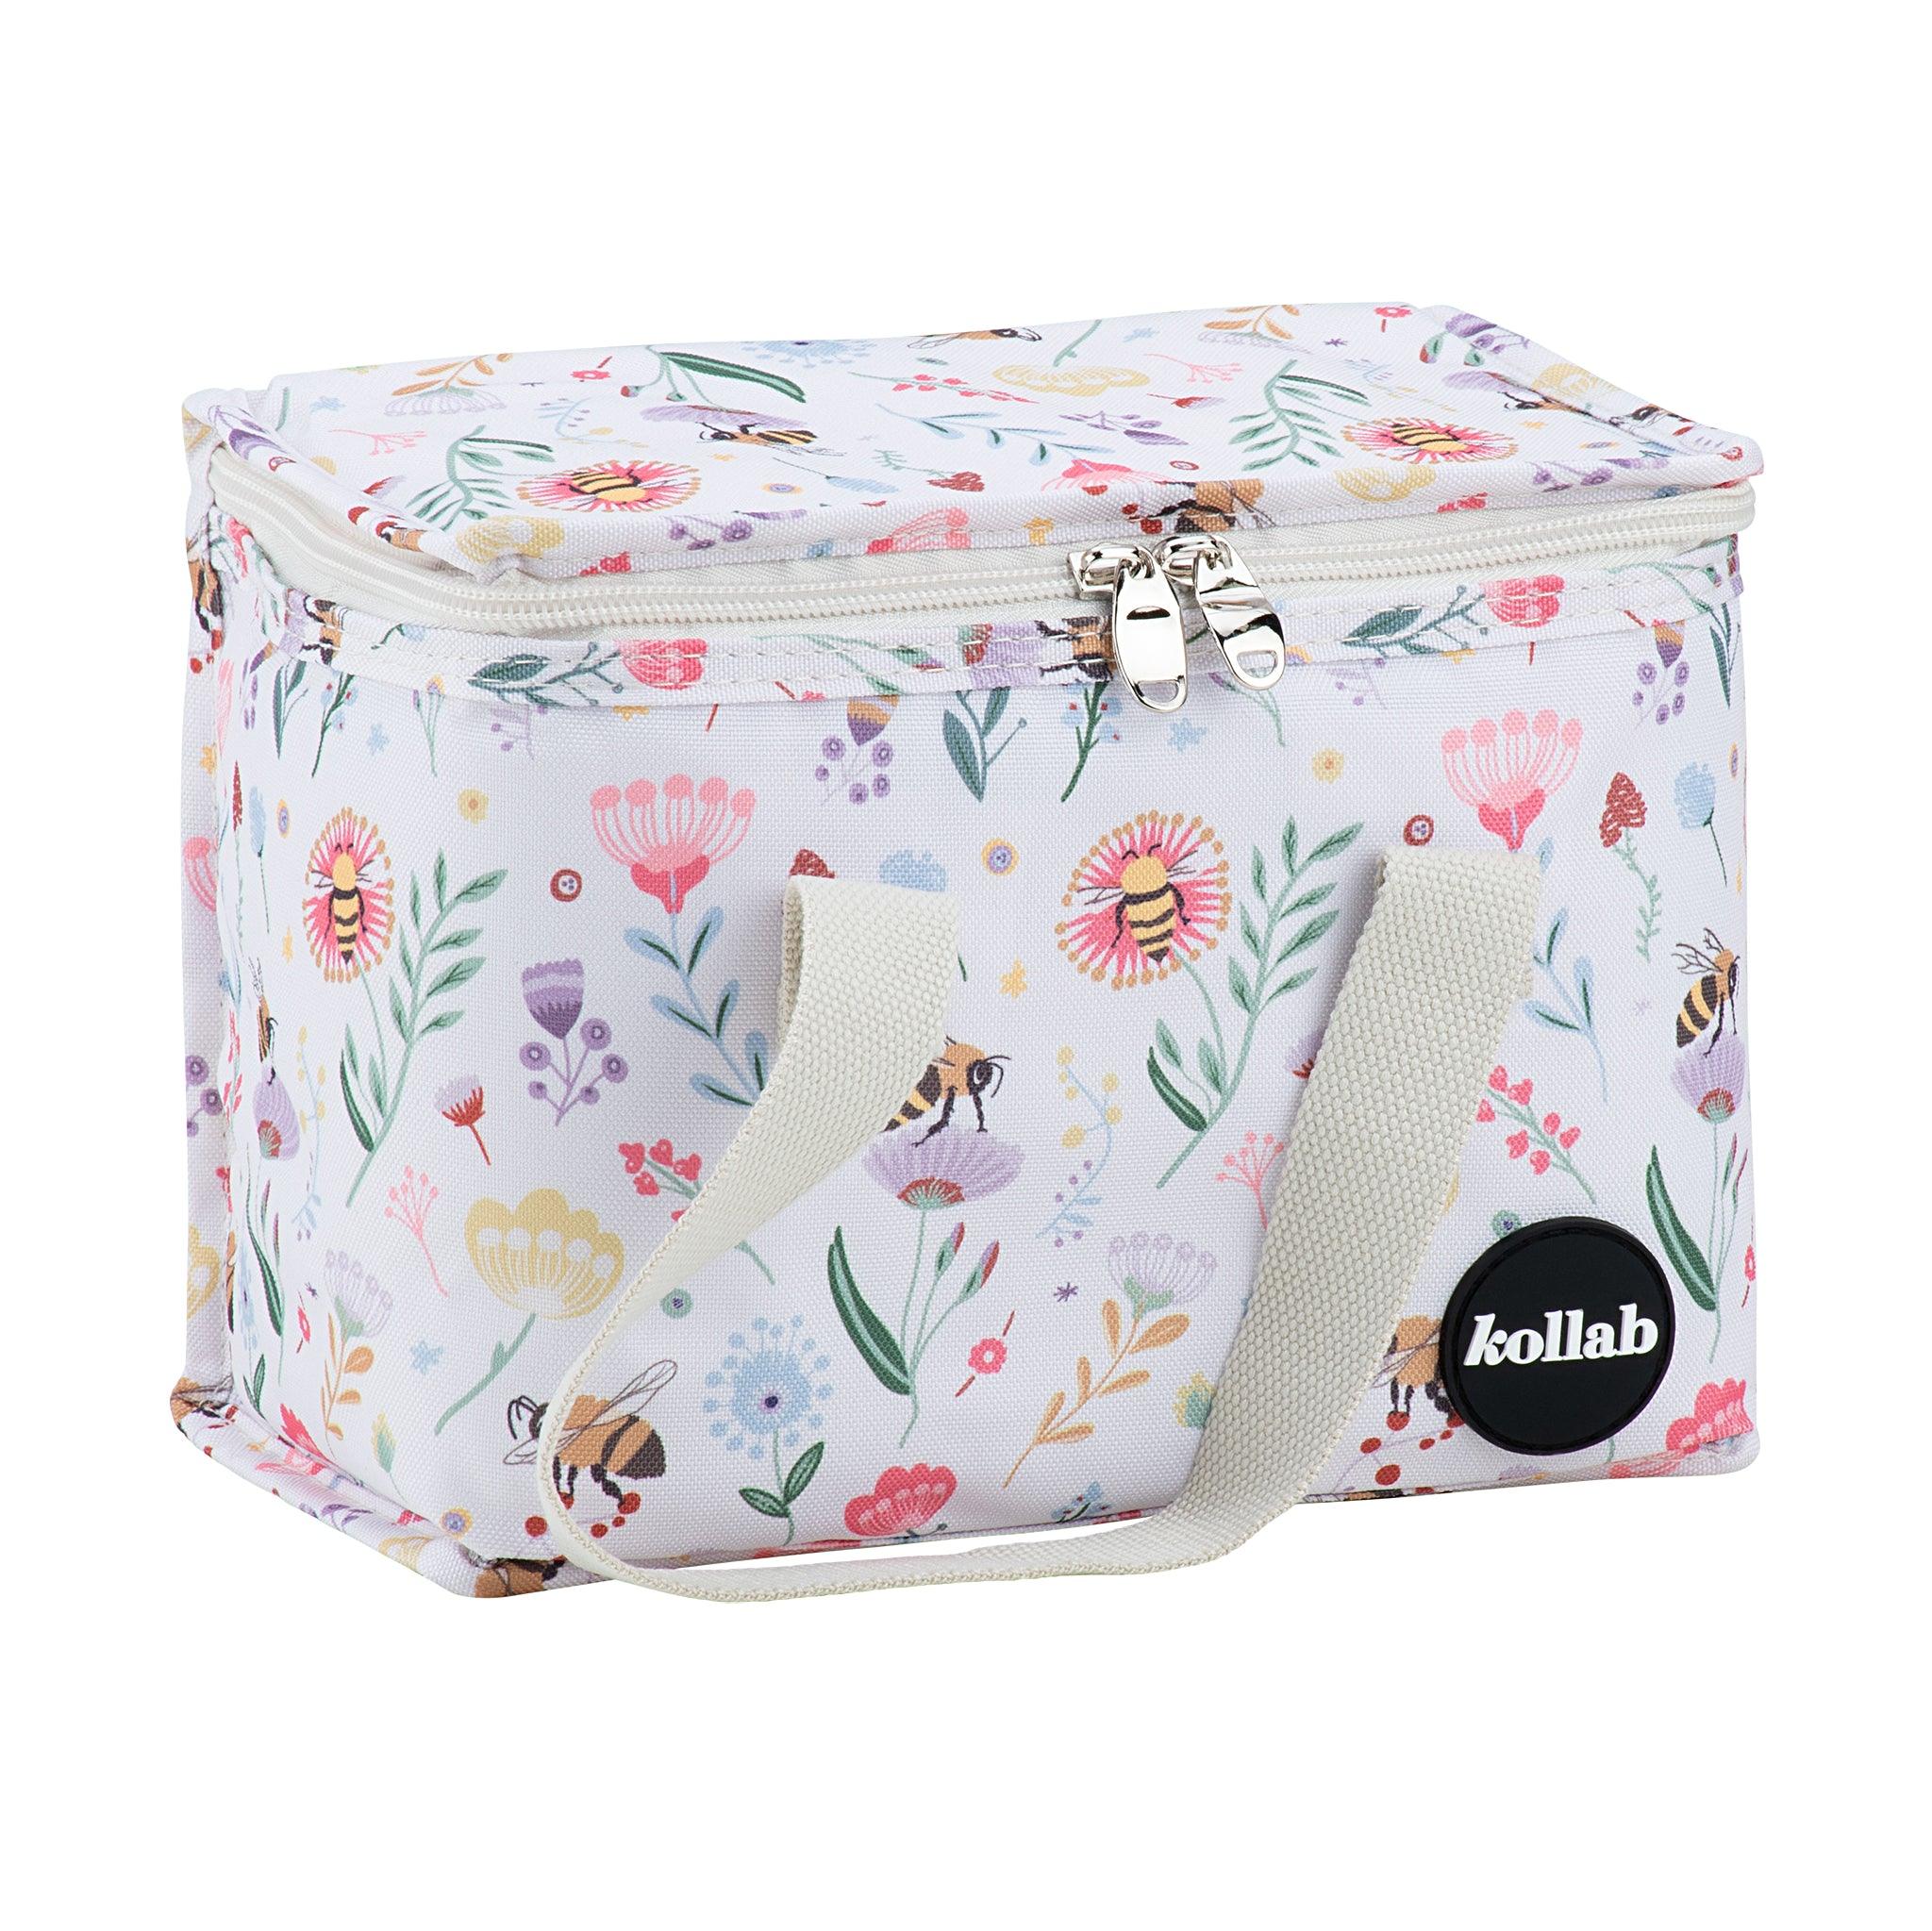 Kollab Holiday Lunch Box Bumble Bee